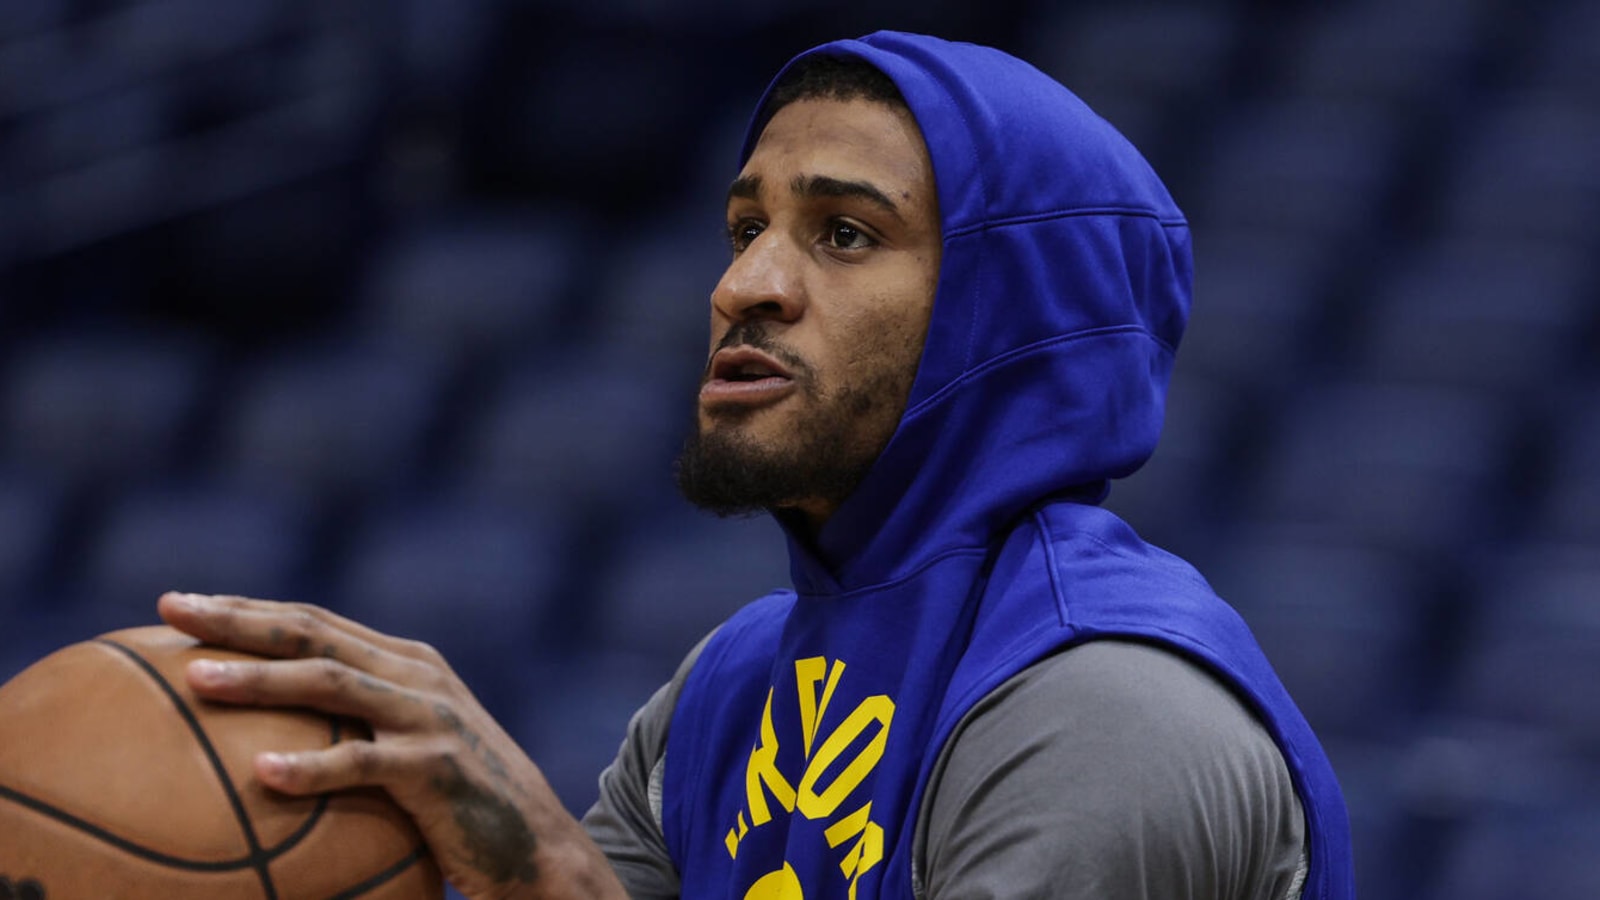 Gary Payton II out for rest of Game 2 with left elbow injury